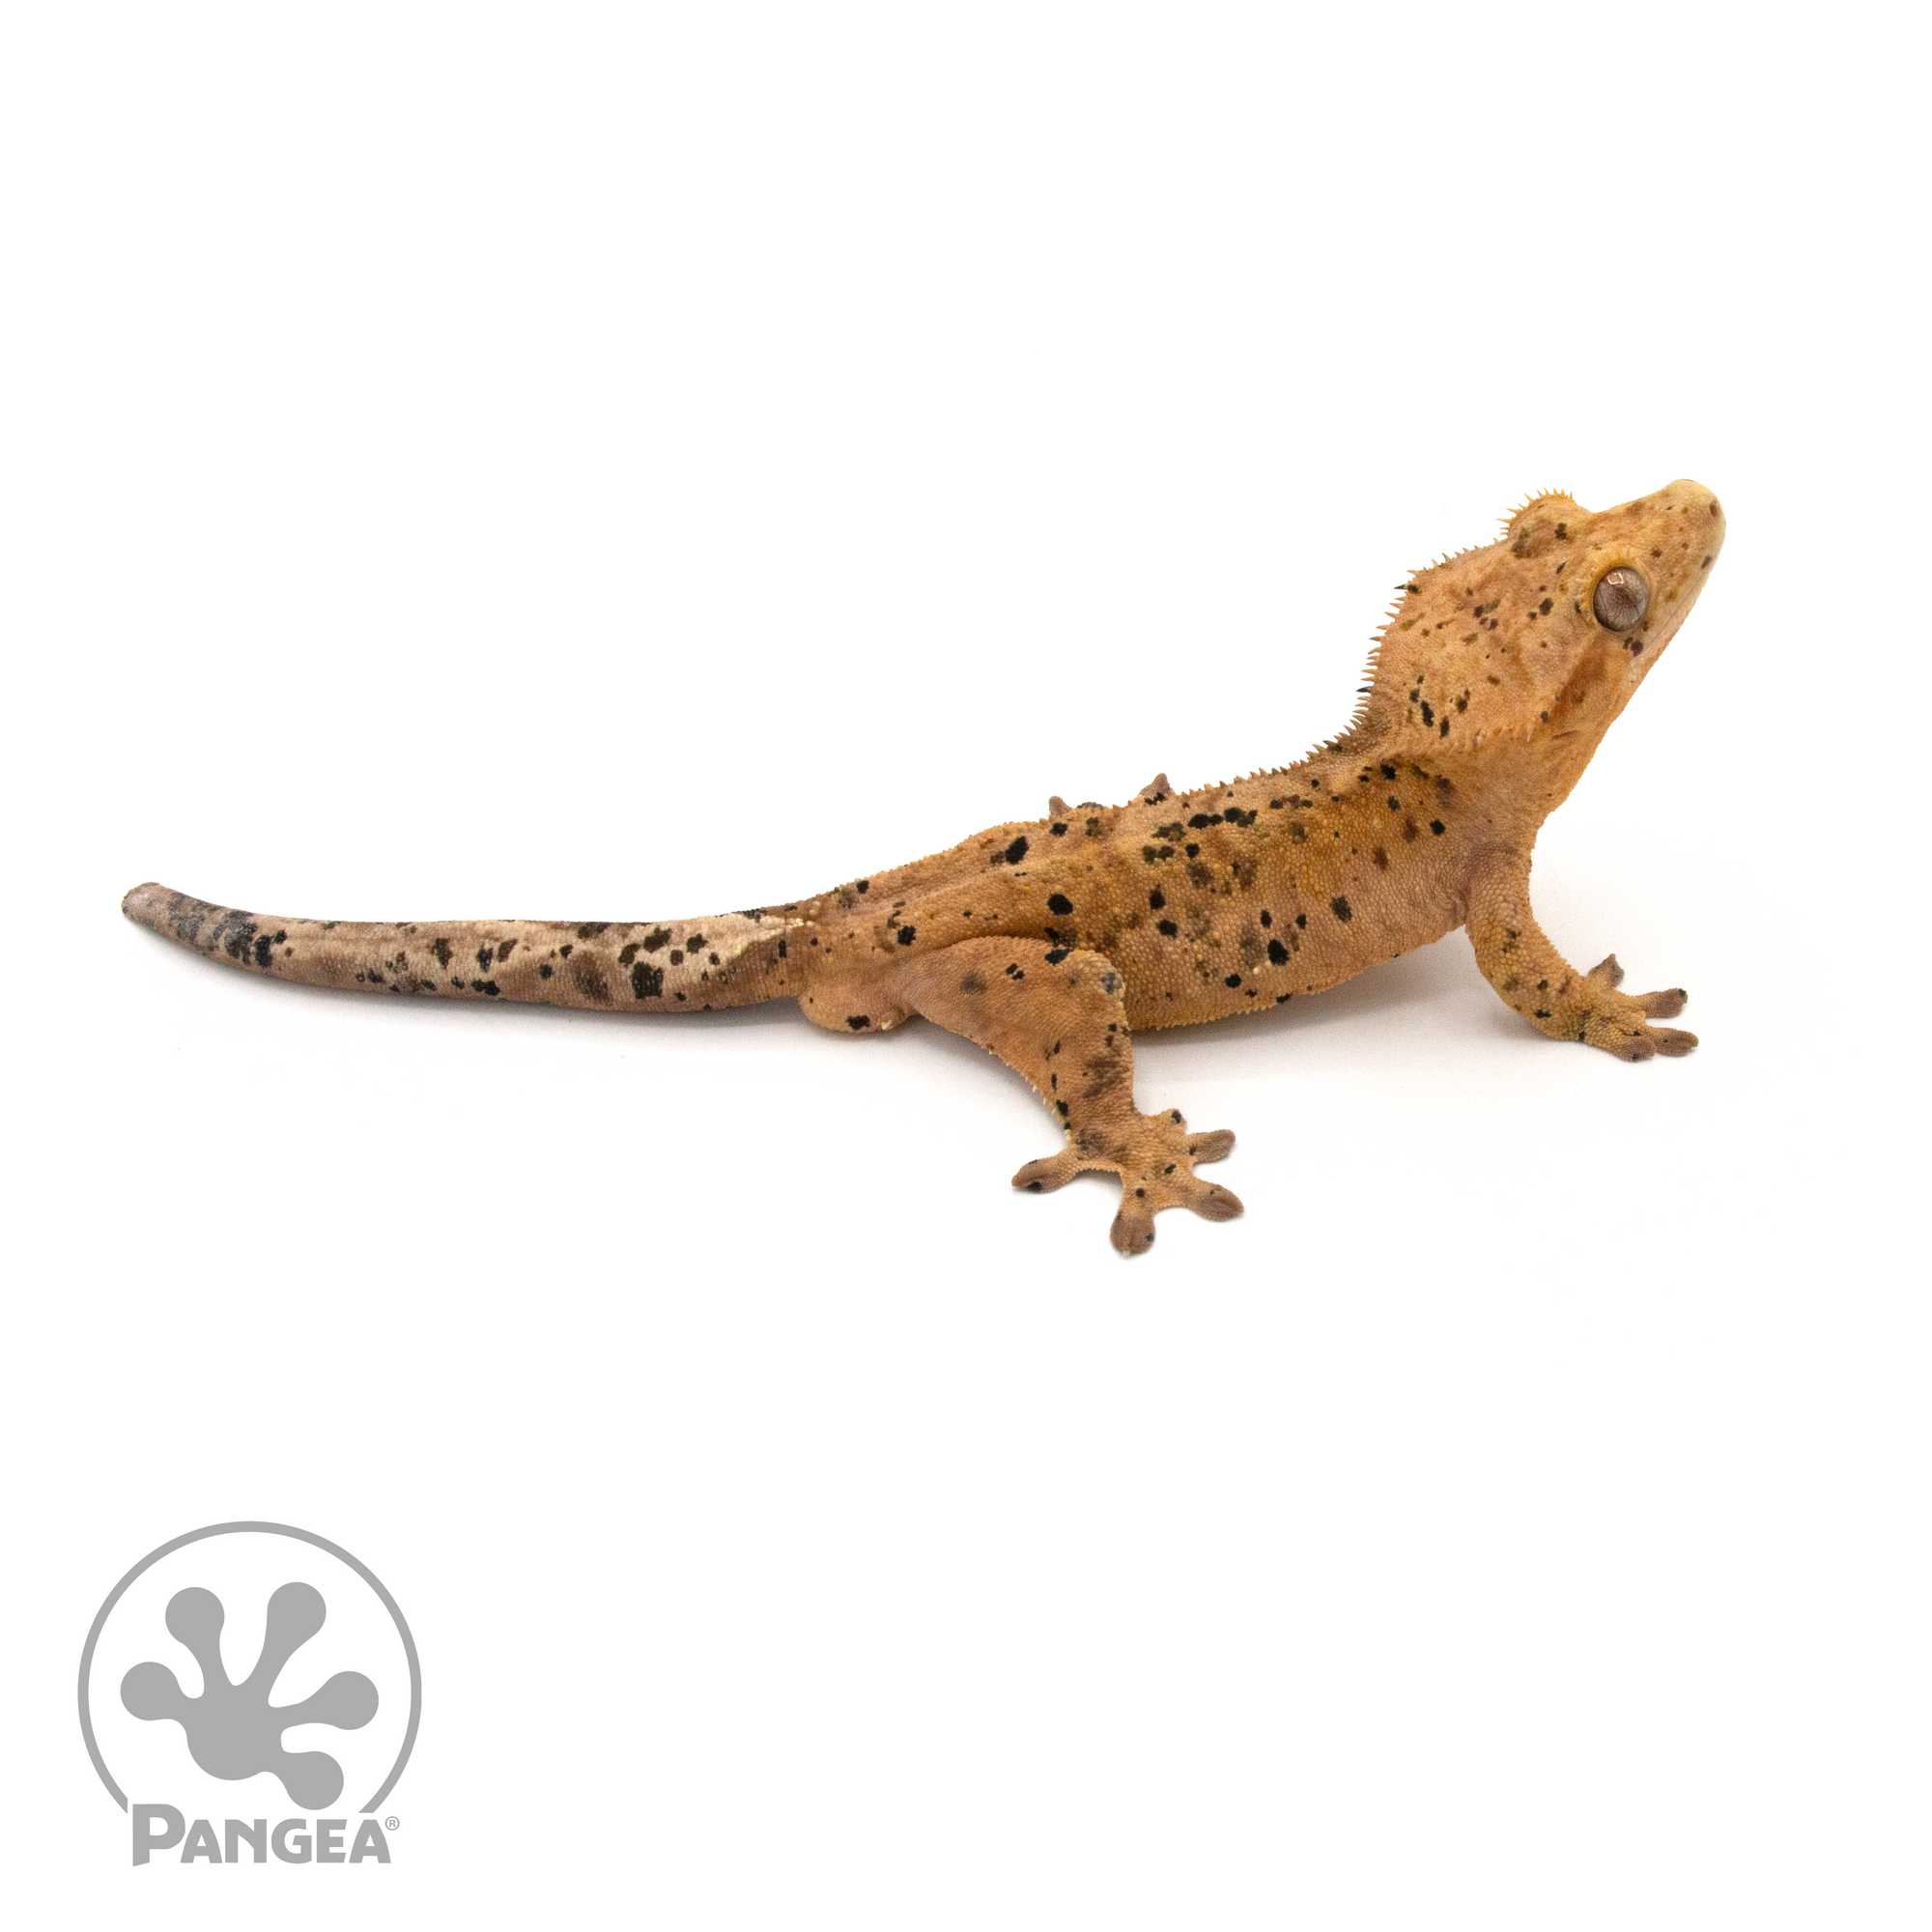 Male Dalmatian Crested Gecko Cr-1010 looking right 